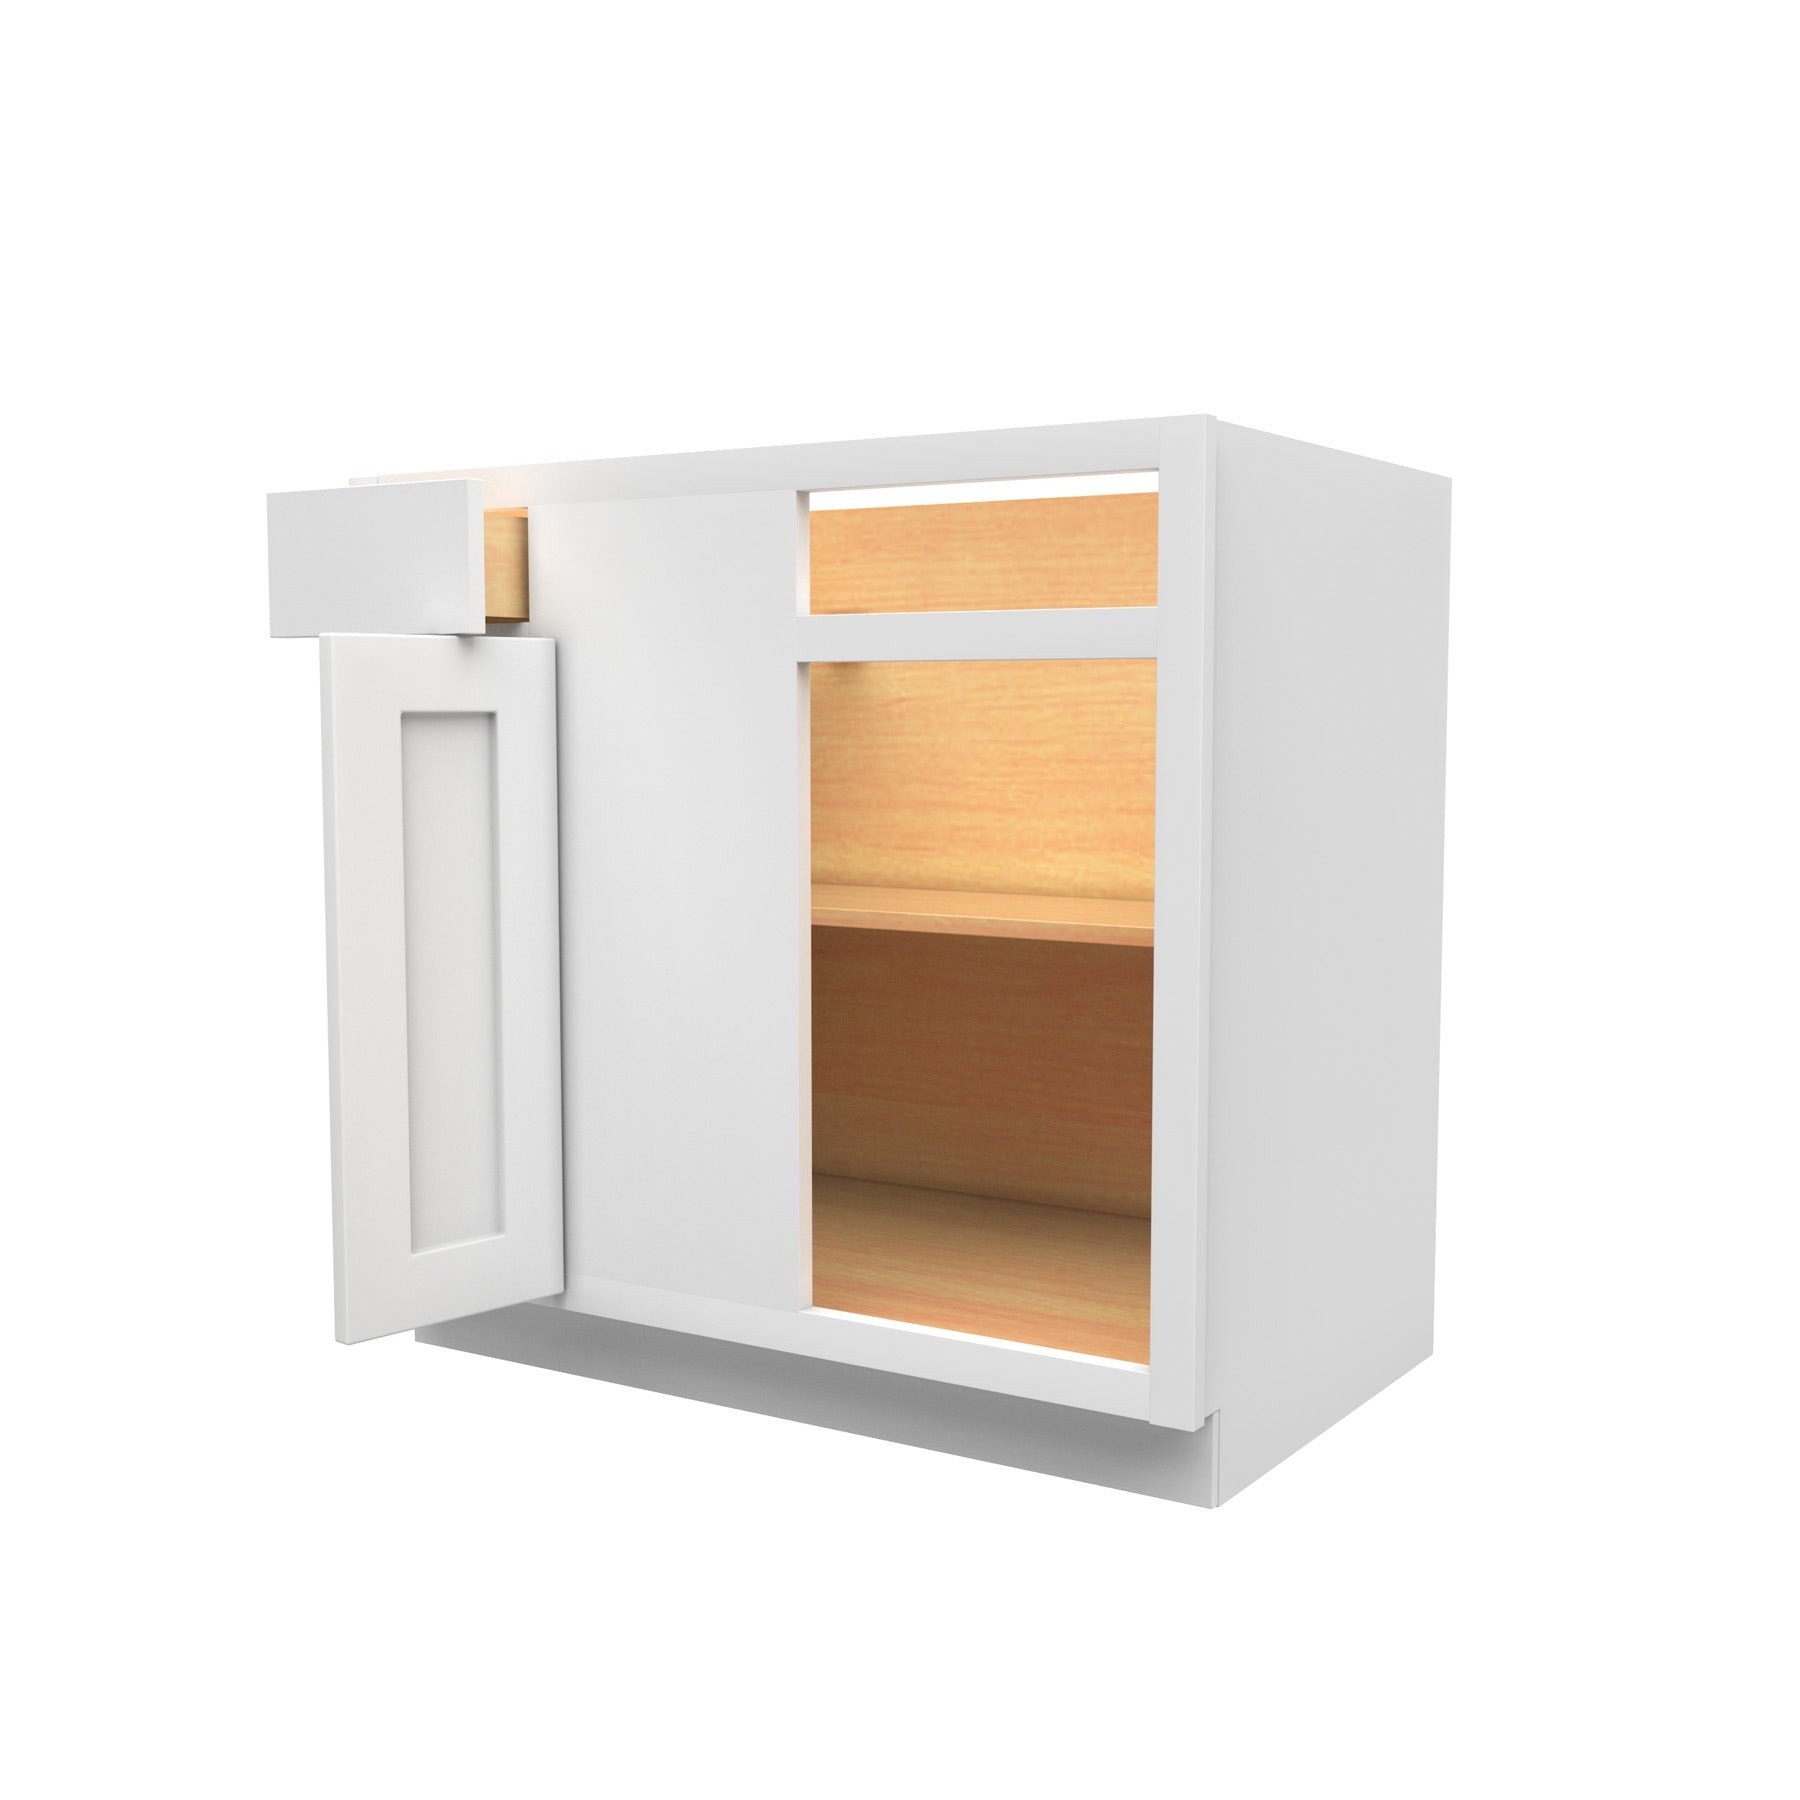 27 Inch Wide Blind Base Cabinet - Luxor White Shaker - Ready To Assemble, 27"W x 34.5"H x 24"D